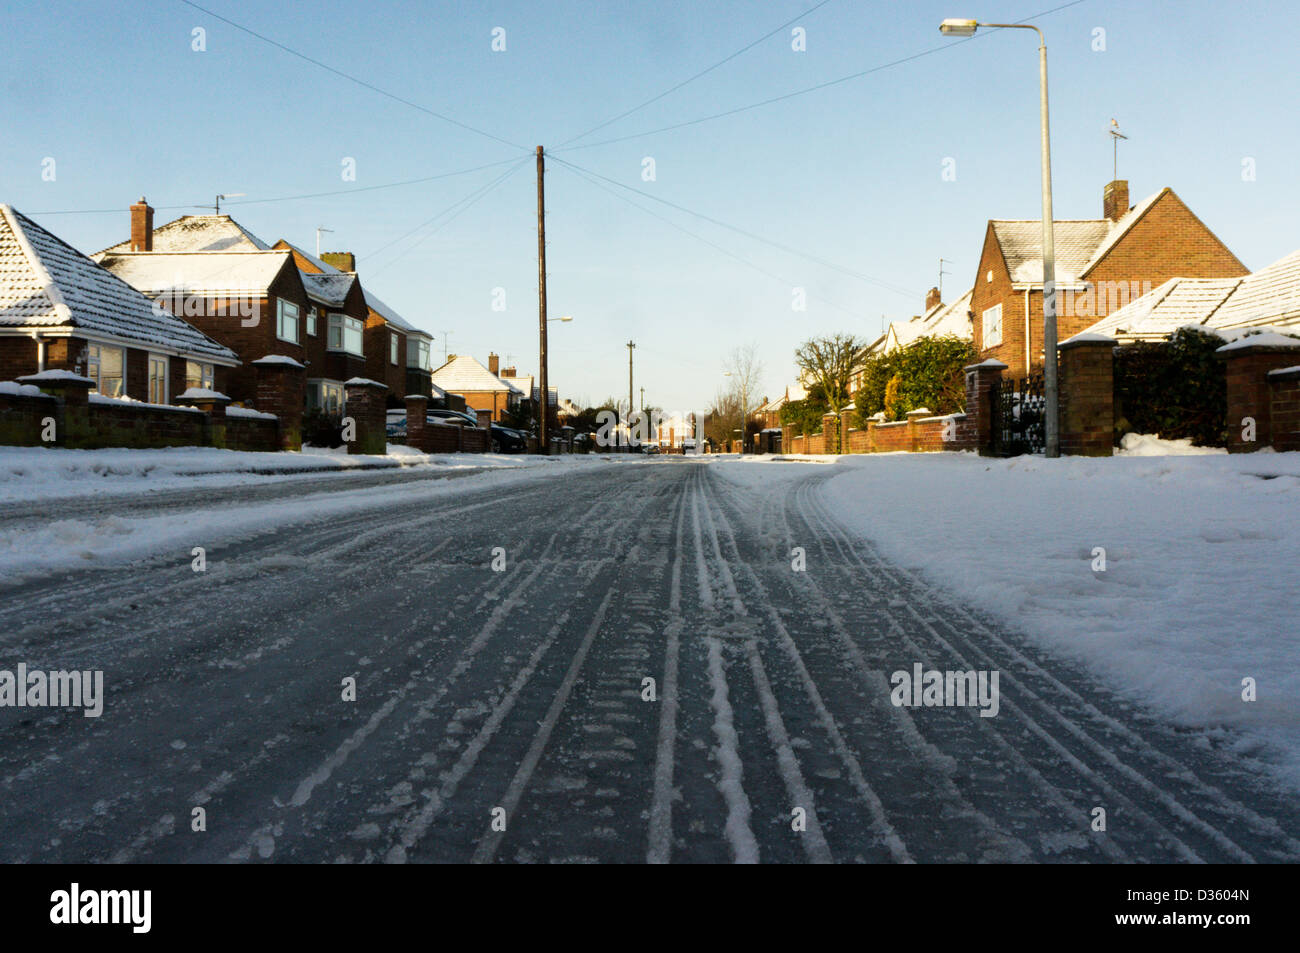 Wheel ruts in snow on an icy residential road. Stock Photo